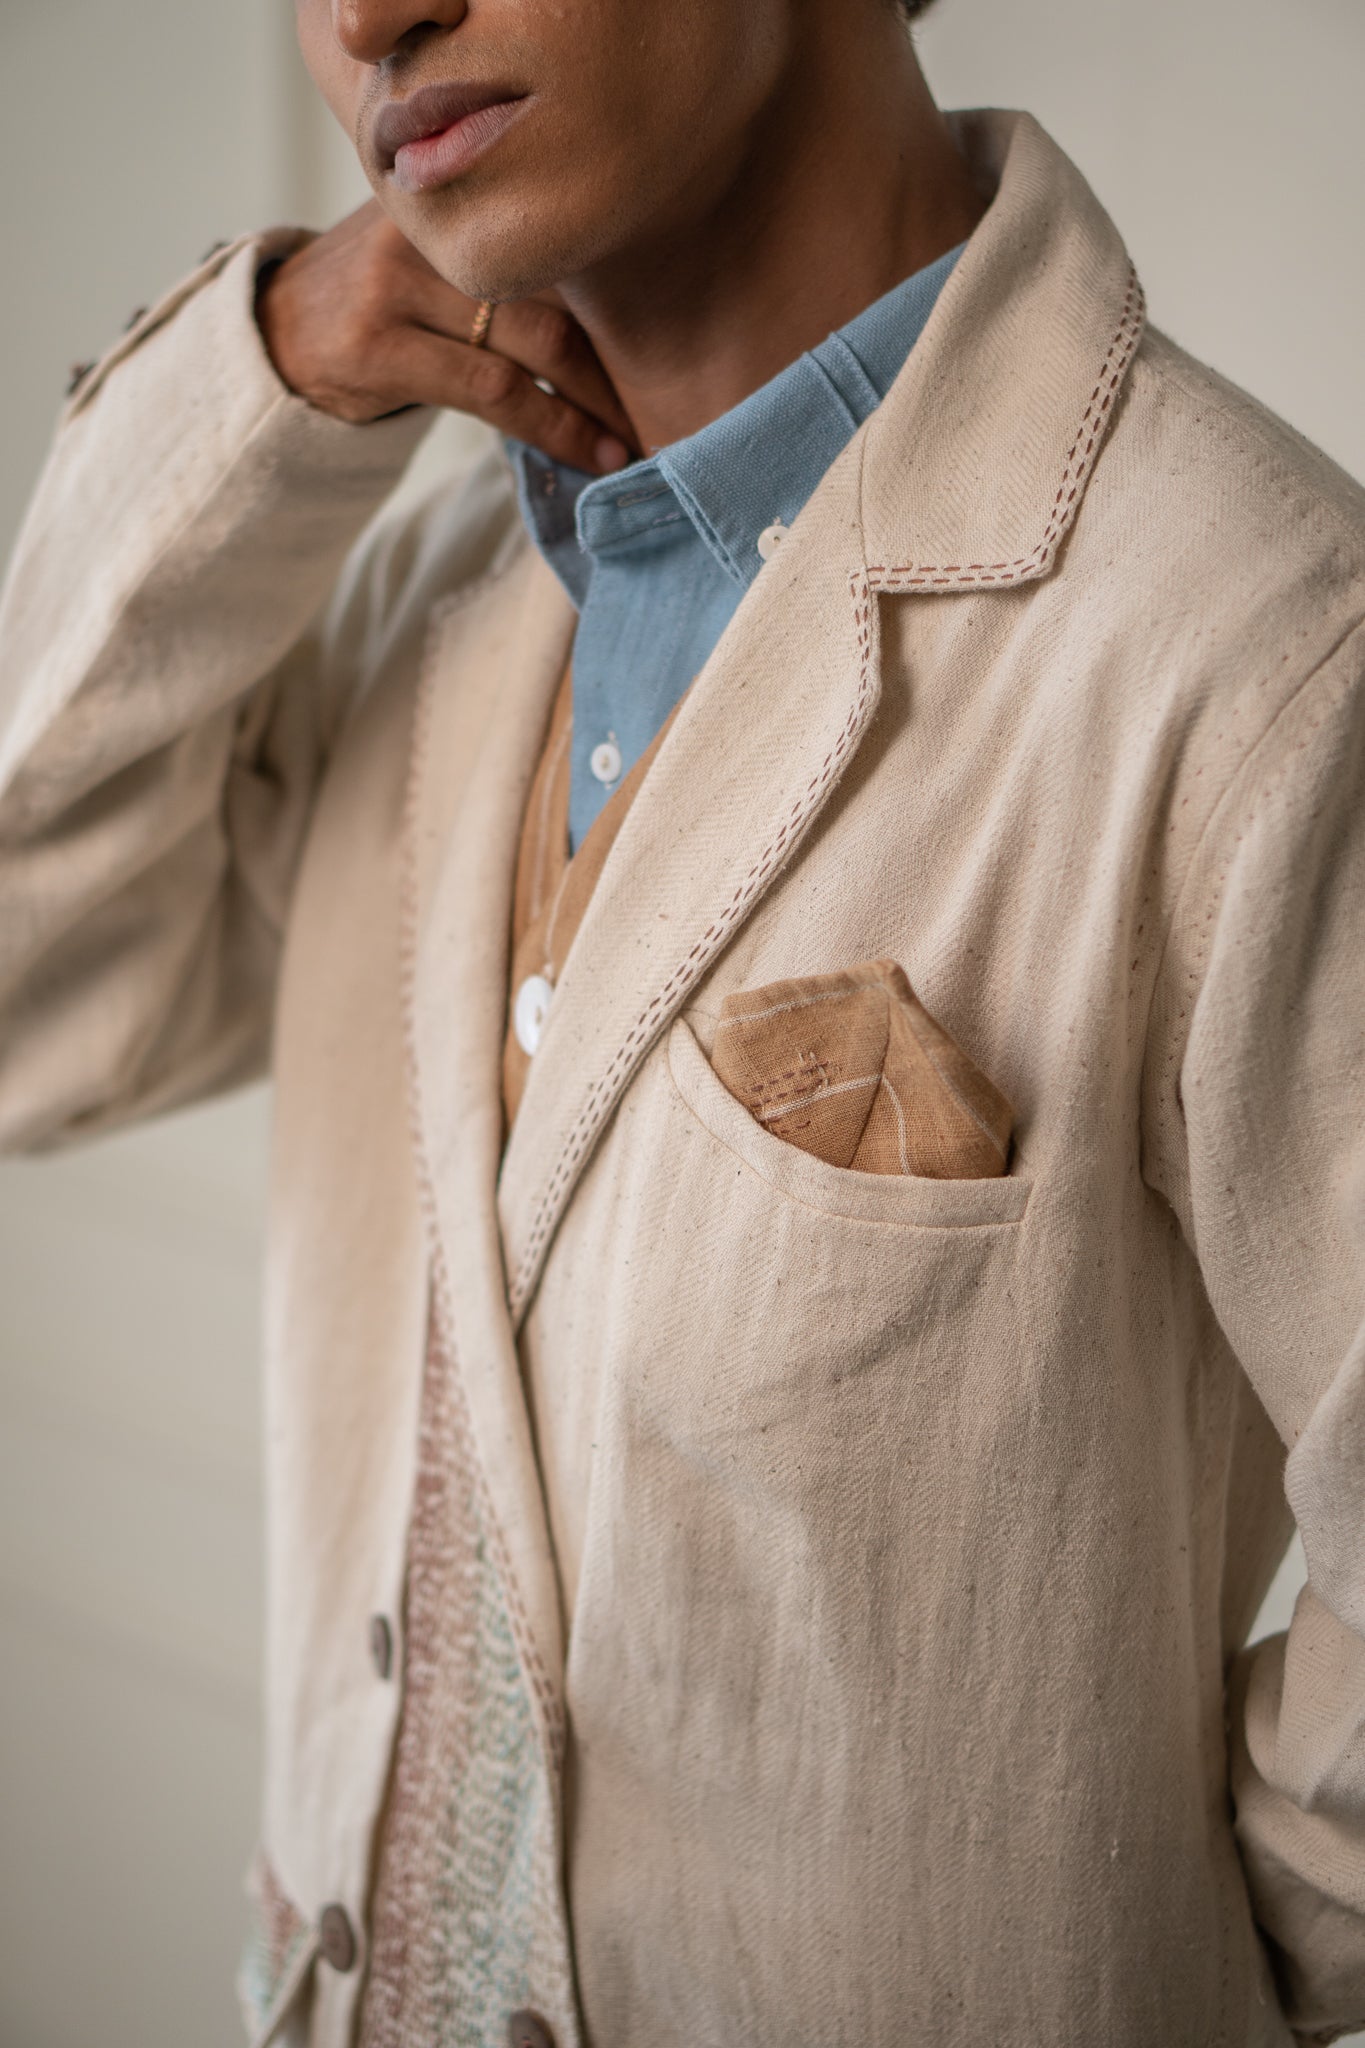 Unisex Double-Breasted Jacket at Kamakhyaa by Lafaani. This item is 100% pure cotton, Casual Wear, Jackets, Kora, Materiality, Menswear, Natural with azo free dyes, Organic, Regular Fit, Solids, Tops, Unbleached and Undyed, Unisex